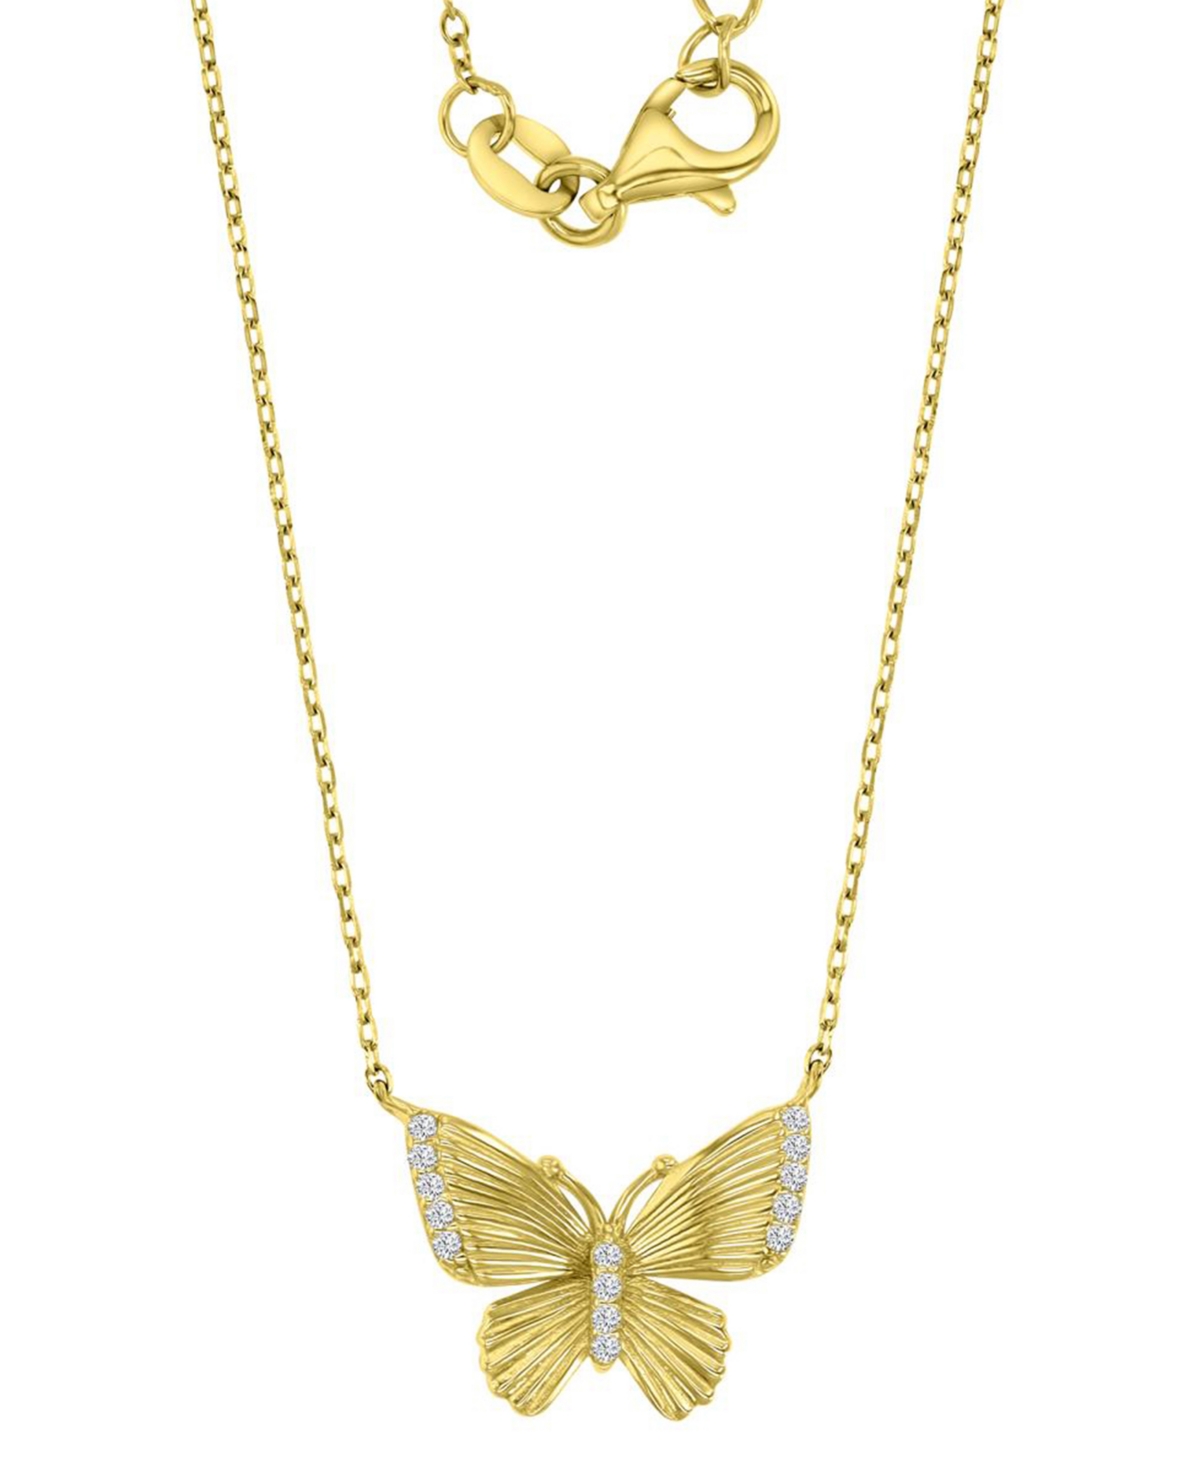 Cubic Zirconia Butterfly Pendant Necklace in 14k Gold-Plated Sterling Silver, 16" + 2" extender - Gold